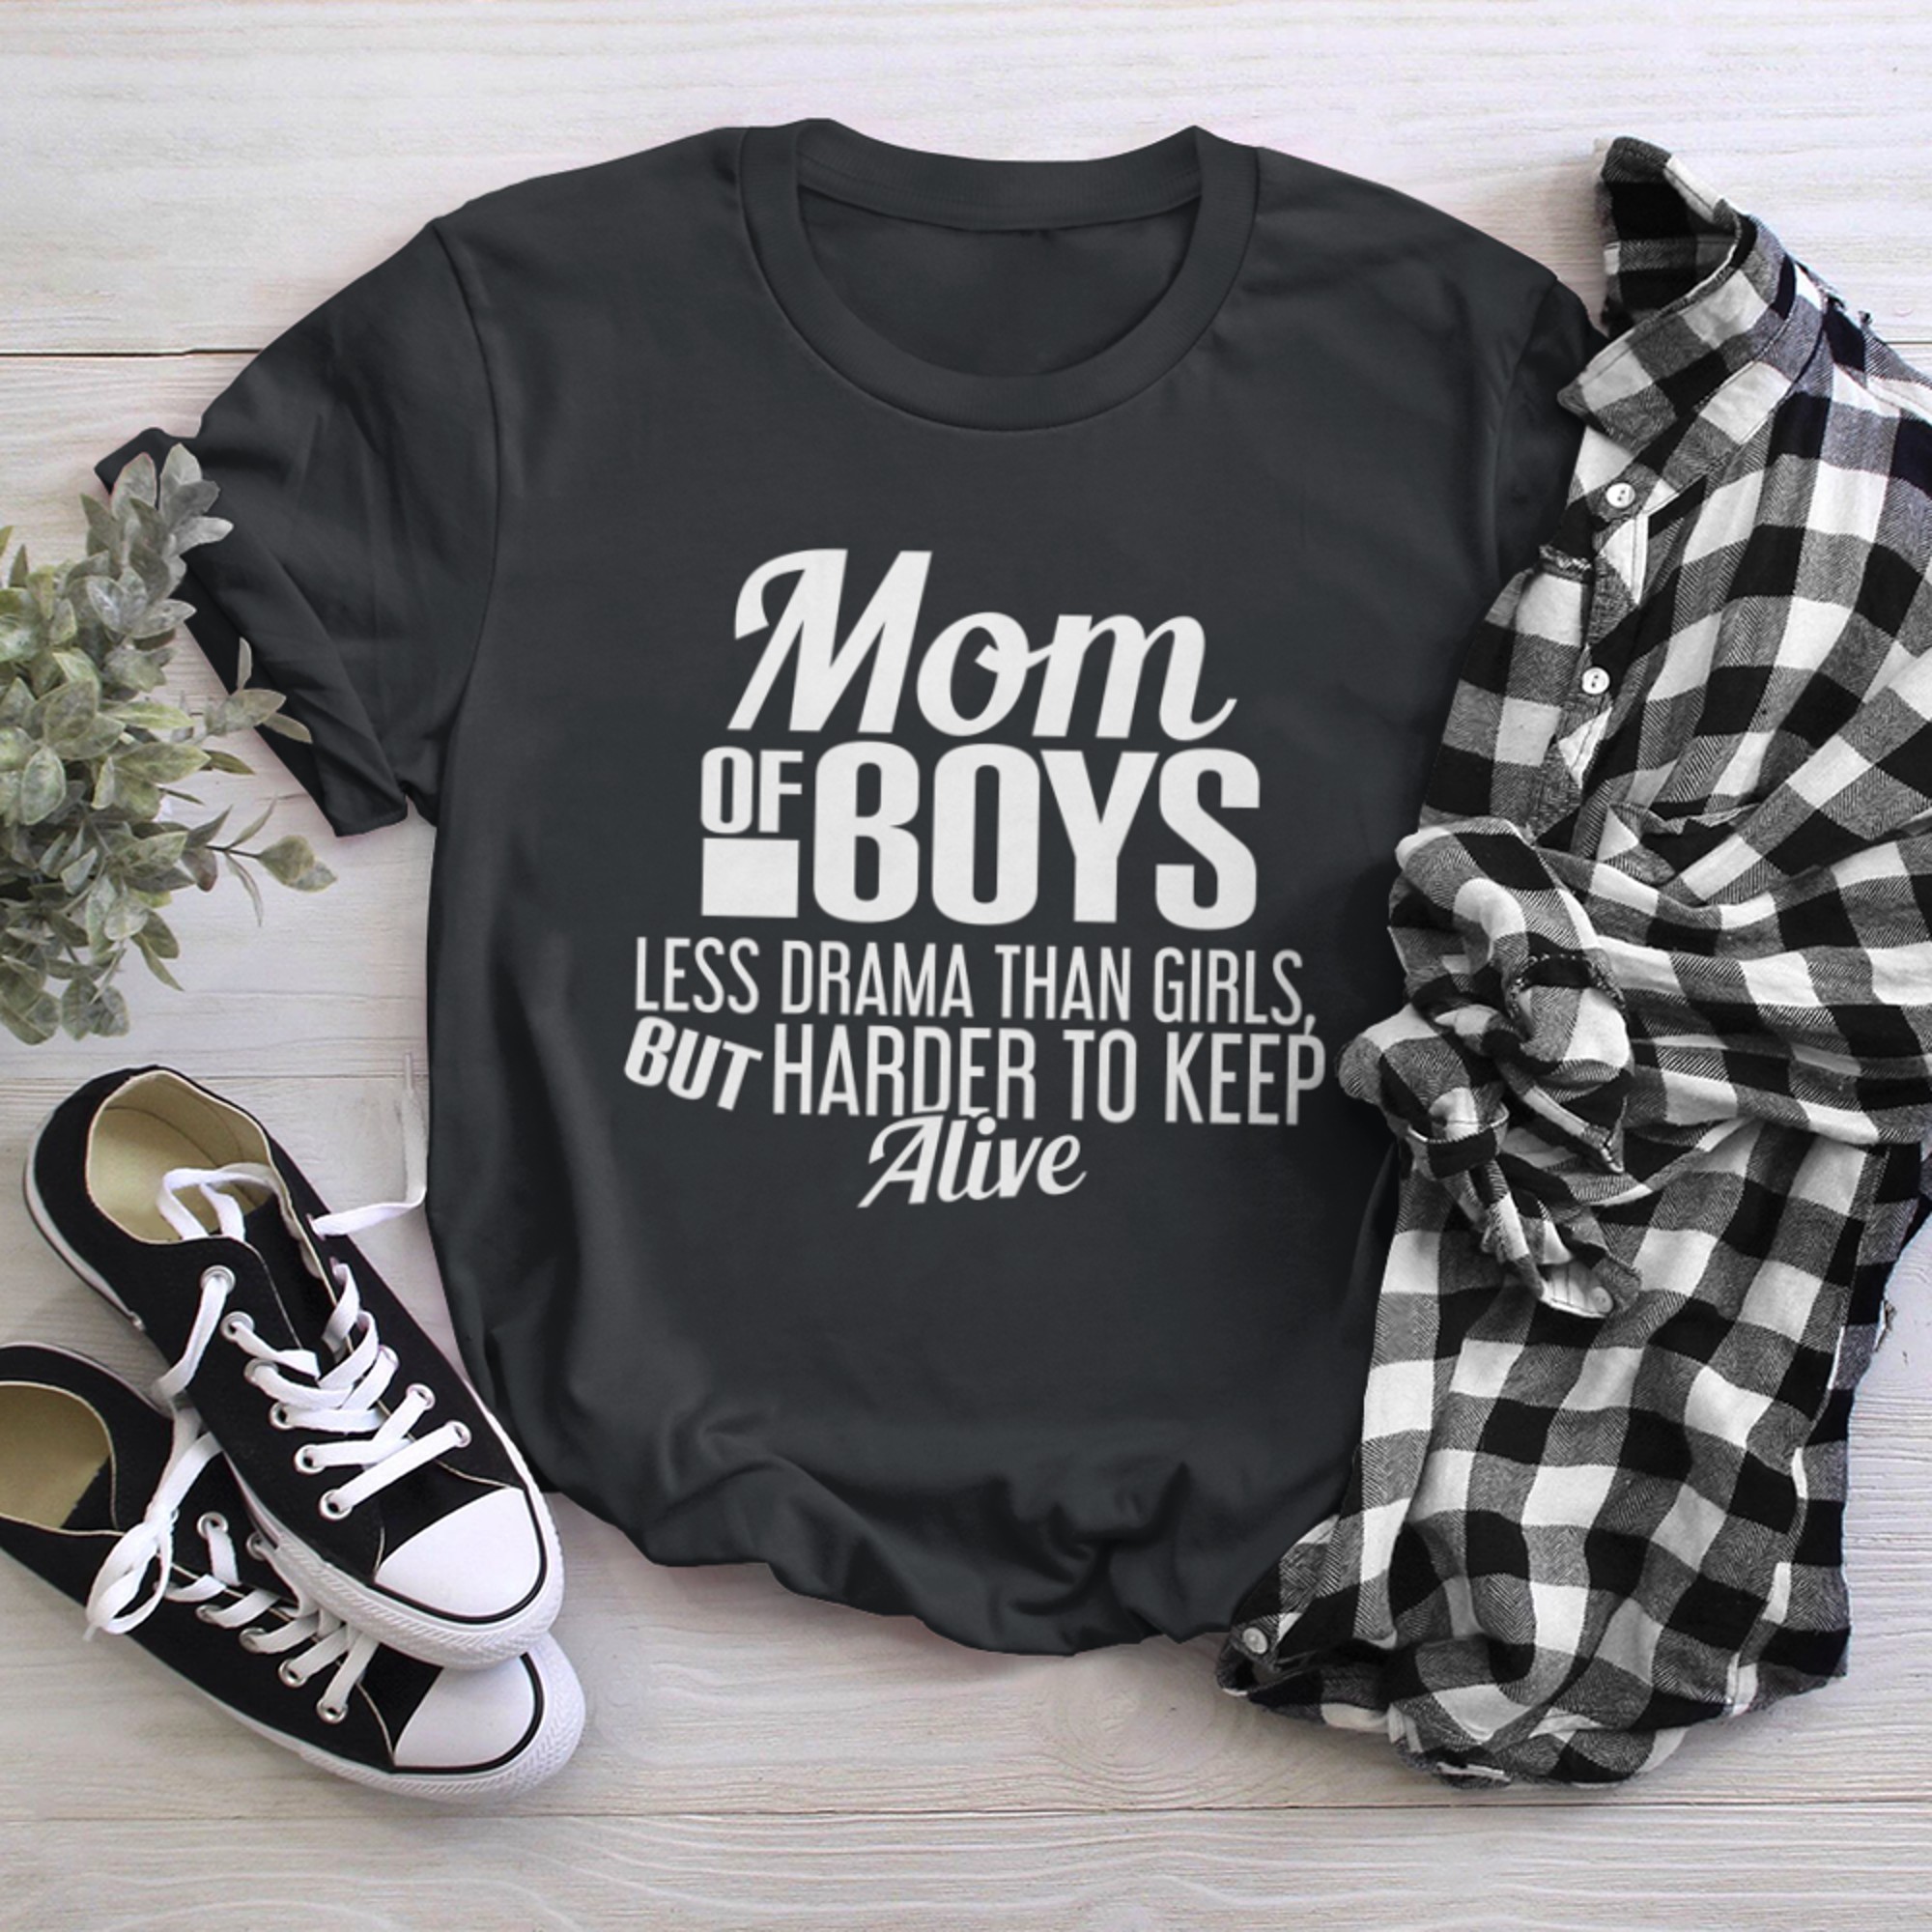 Mom Of Less Drama Than But Harder To Keep Alive (4) t-shirt black